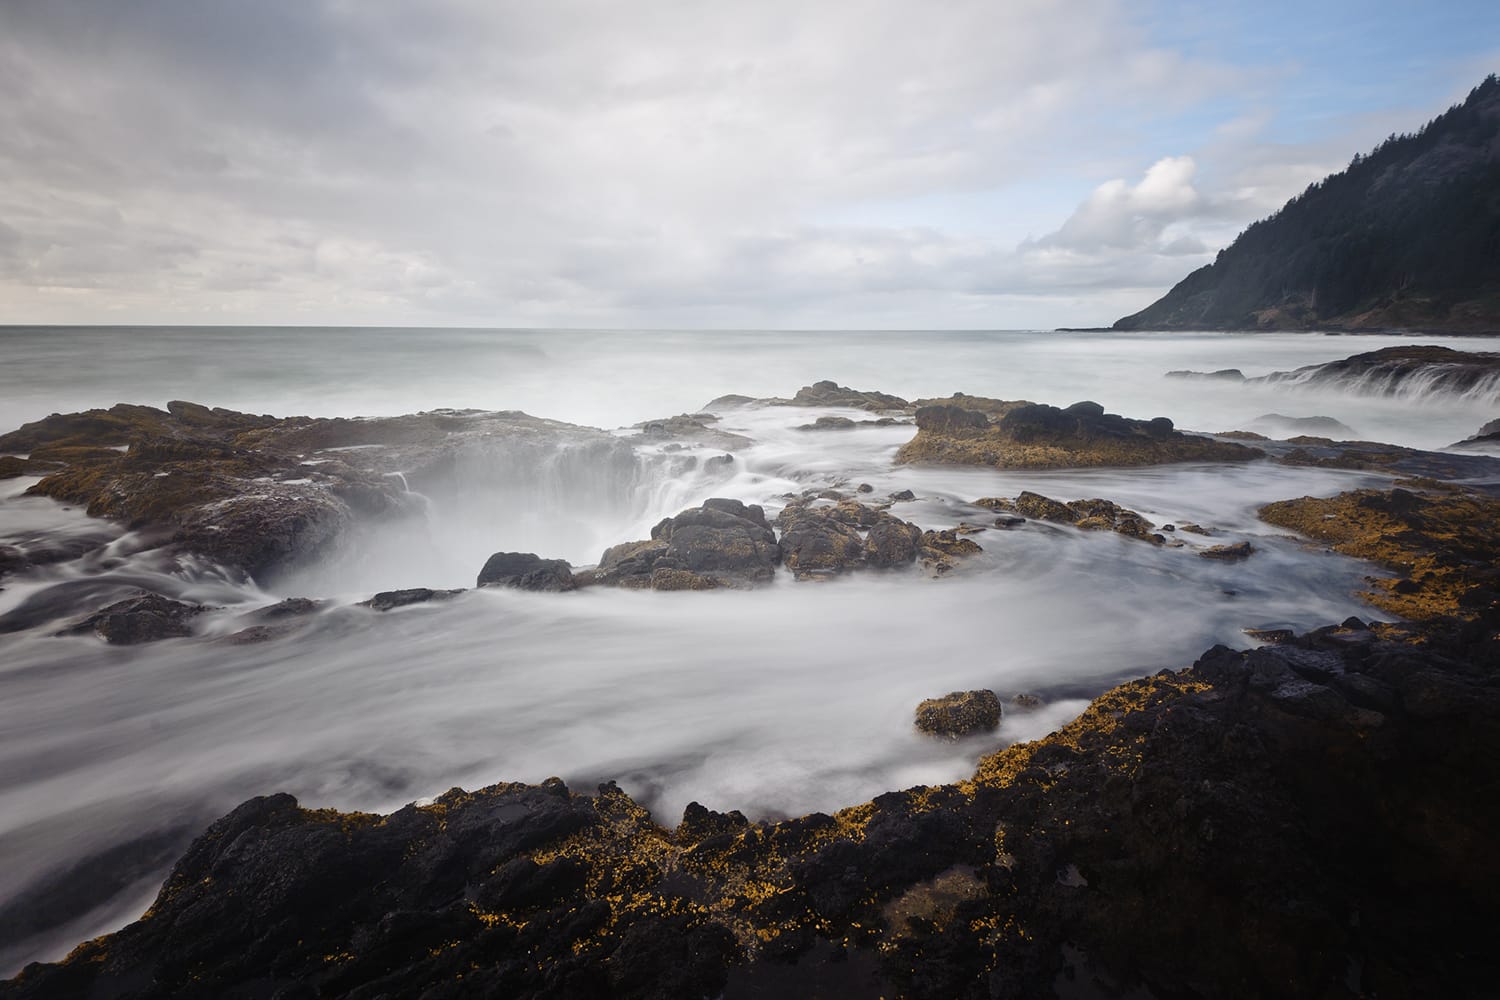 Using Neutral Density (ND) Filters